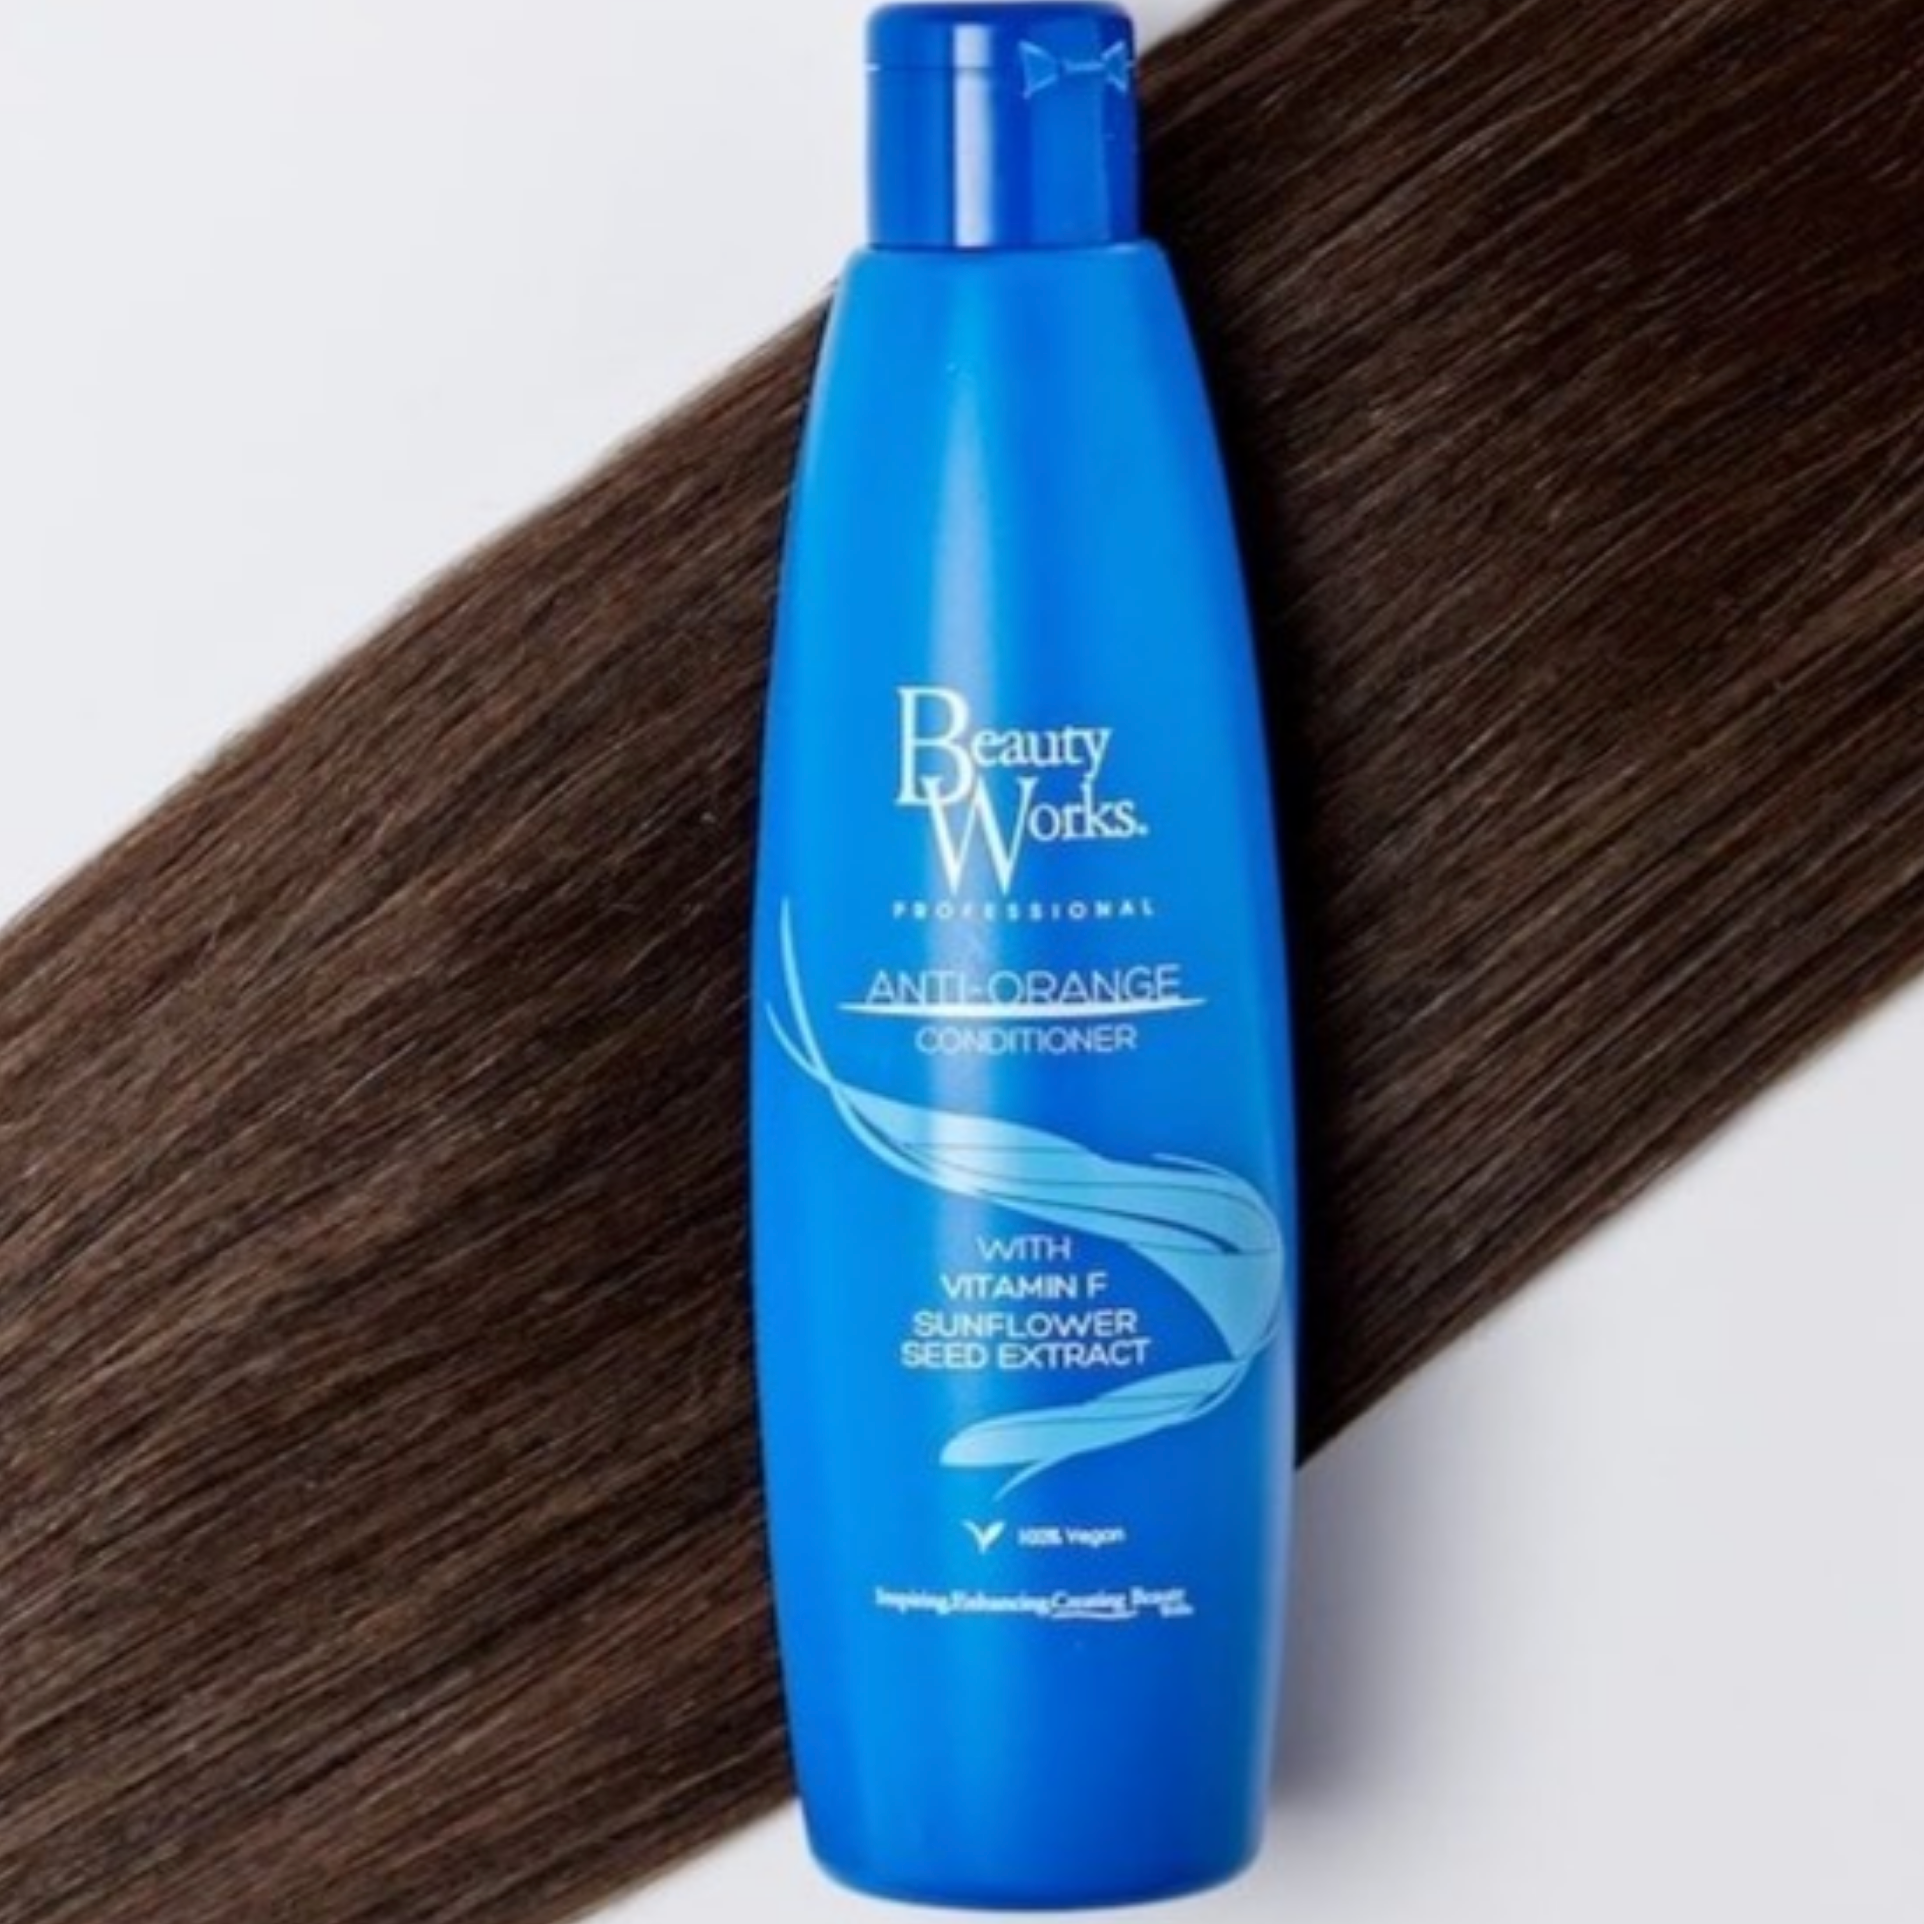 Beauty Works Anti-Orange Conditioner, with brunette hair